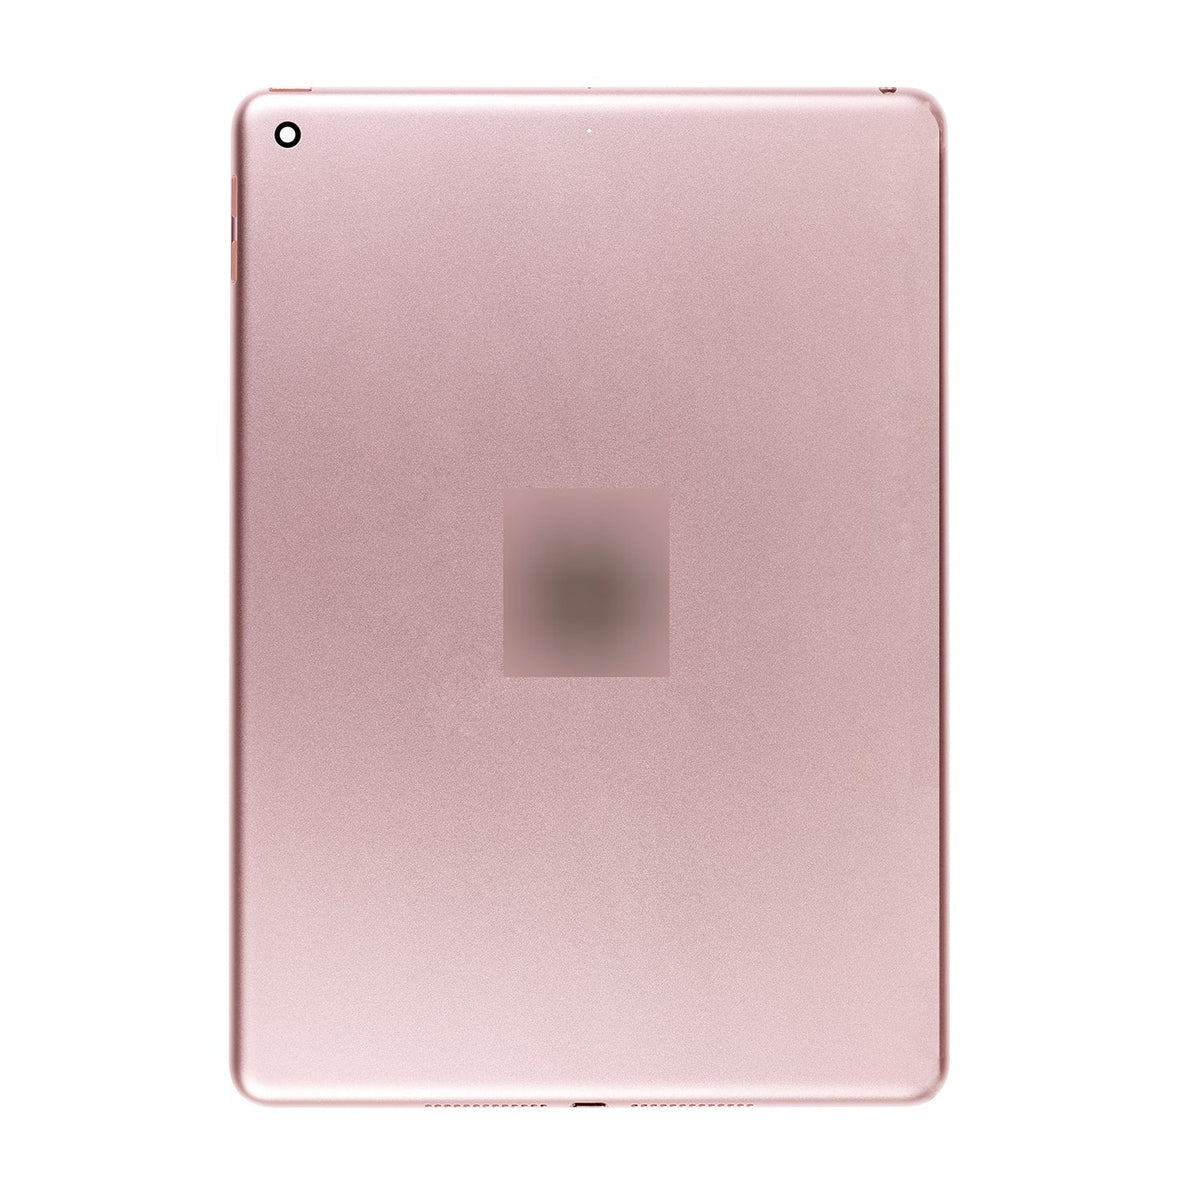 ROSE BACK COVER (WIFI VERSION) FOR IPAD 6